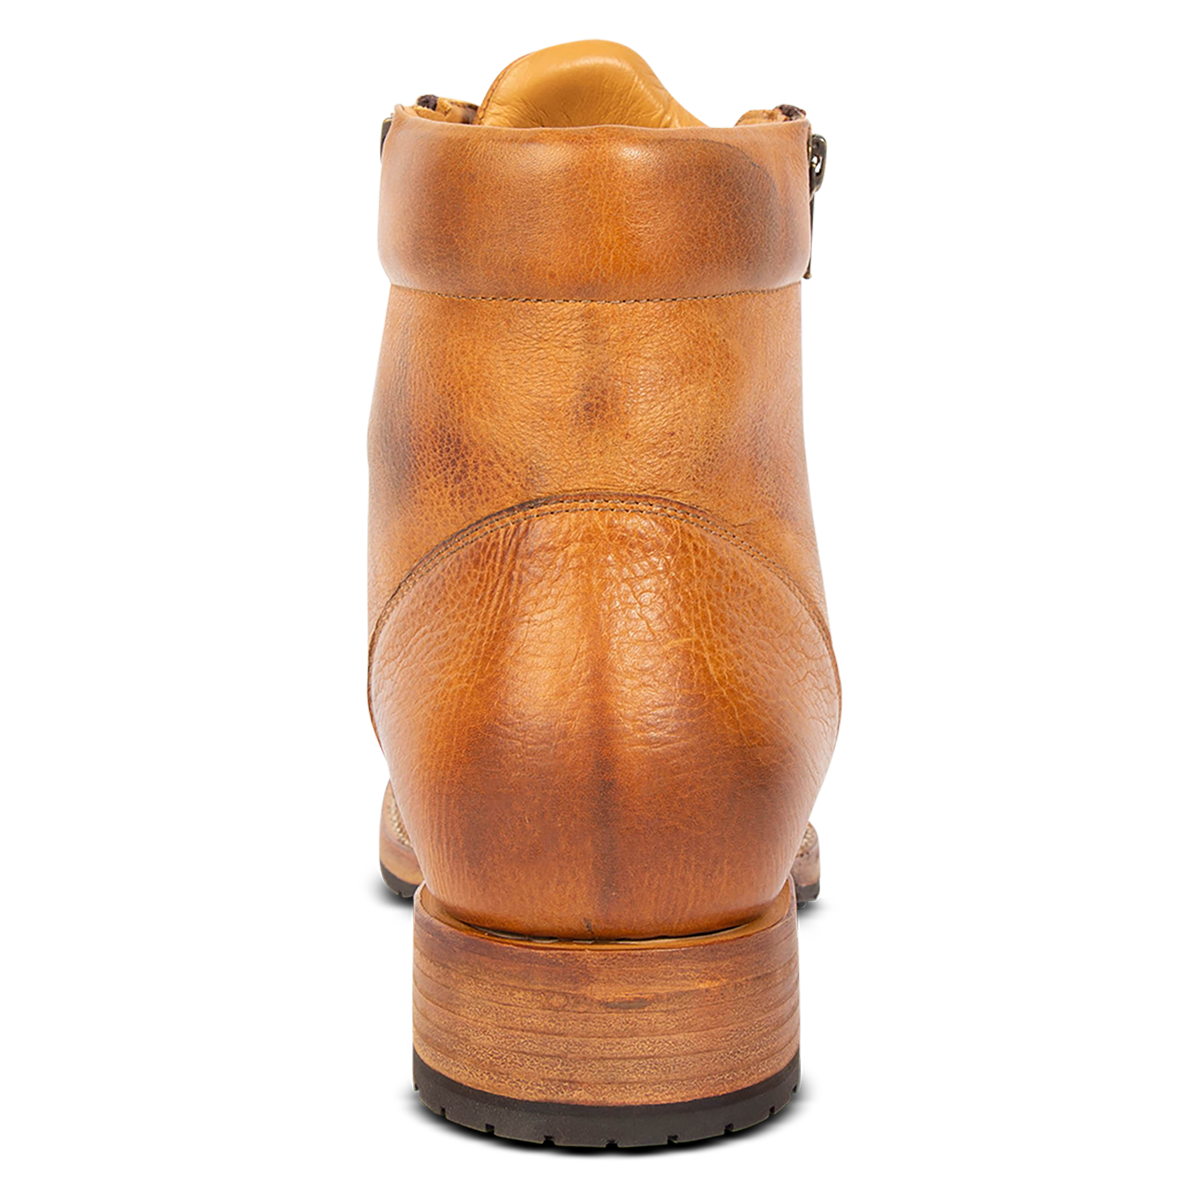 Back view showing low block heel on FREEBIRD men's Chevy tan leather boot